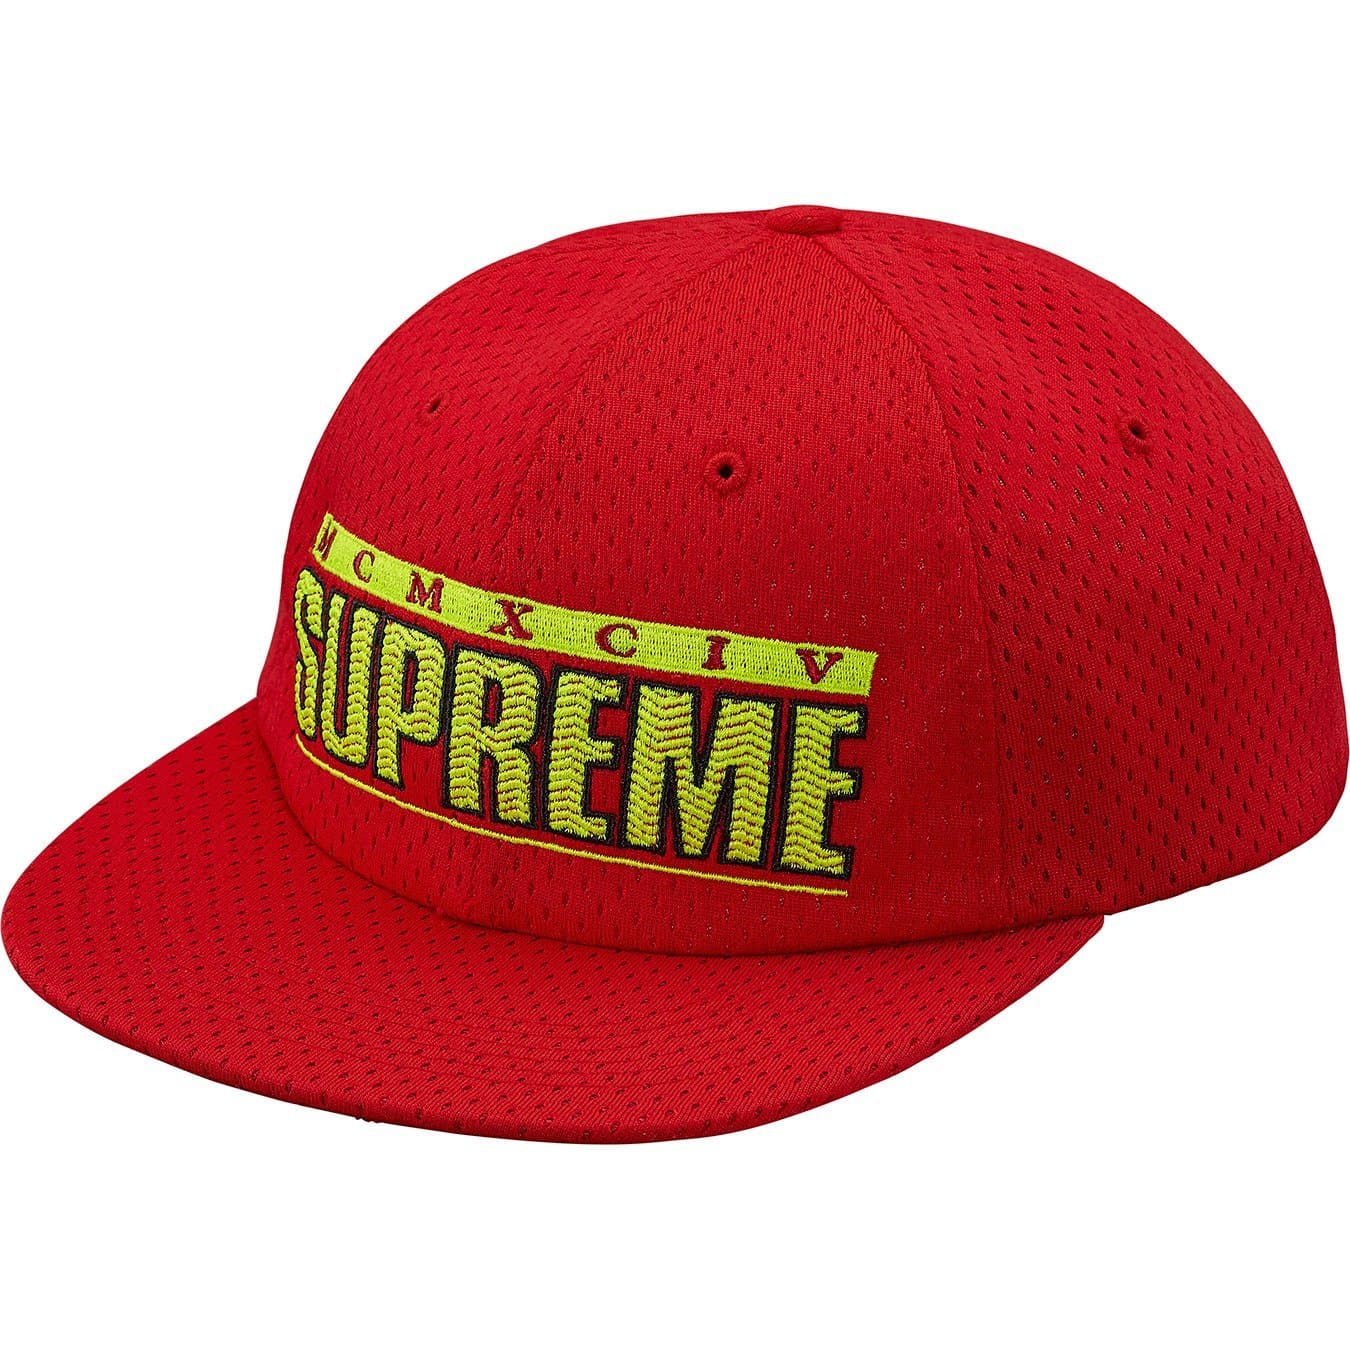 Supreme cap FW 19. Supreme ss21. Кепка the North face. Кепка круглая мужская Supreme. Hats 18